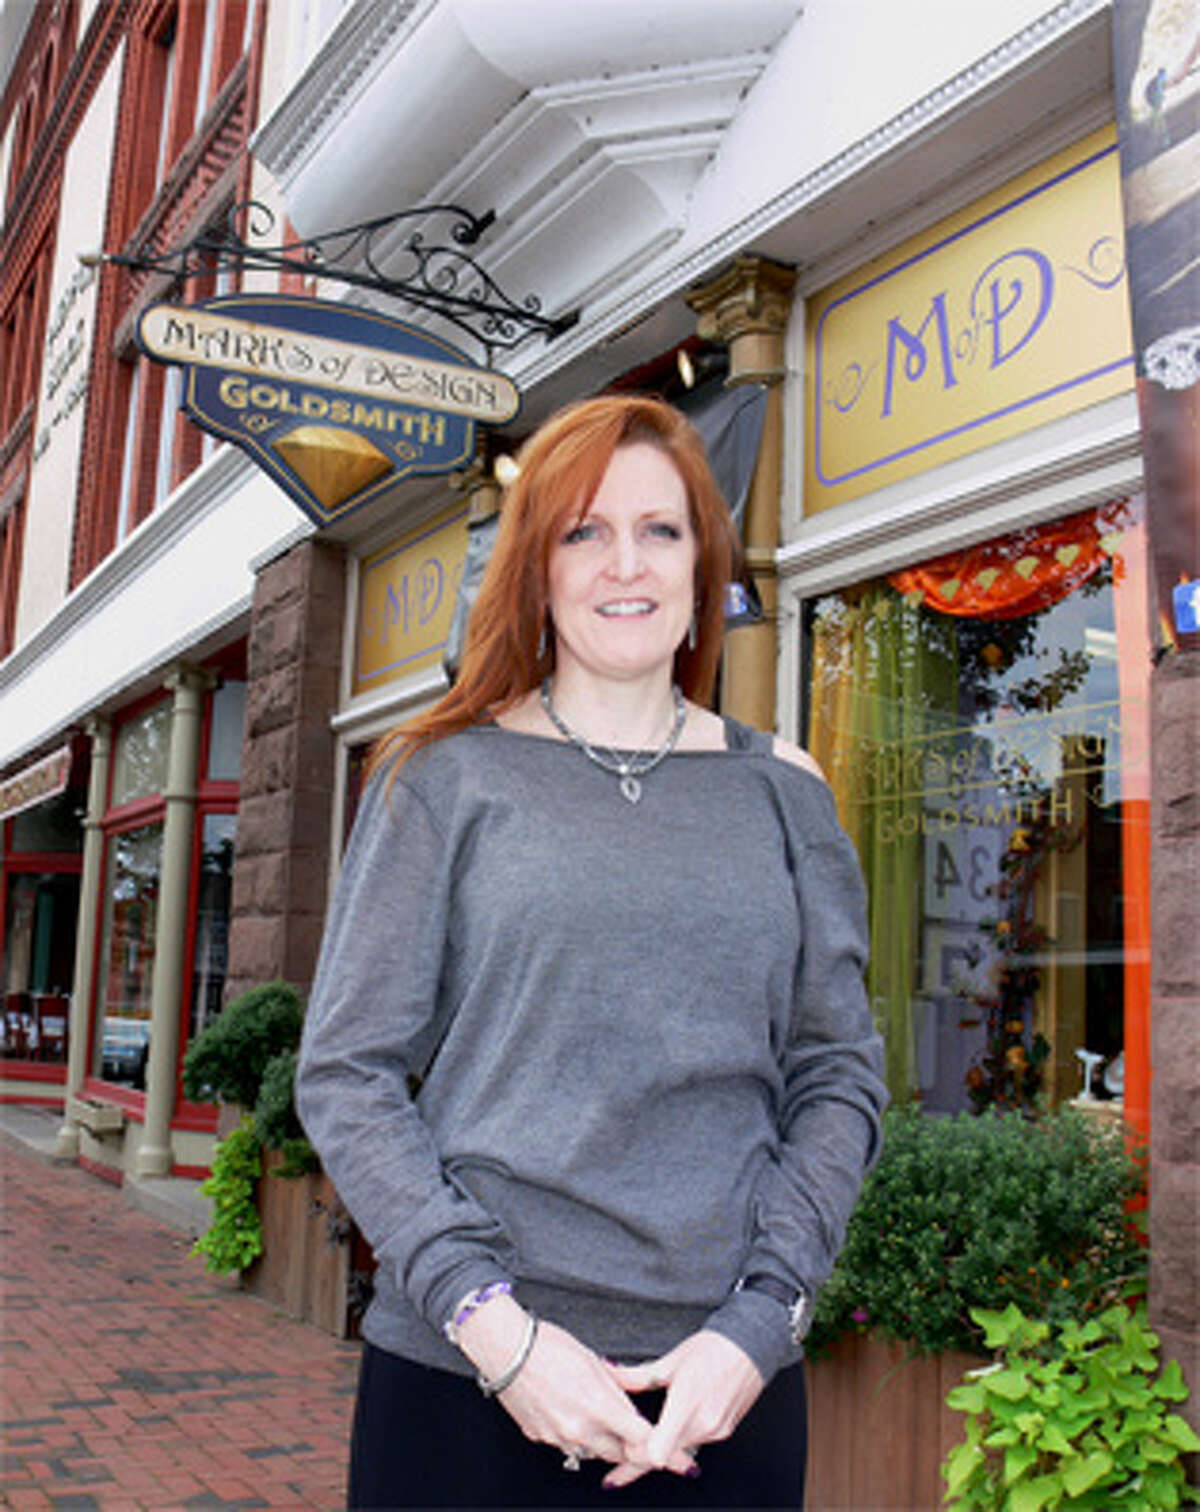 Marks of Design owner Kate Marks outside the Howe Avenue retail establishment, now in its 14th year of operation.